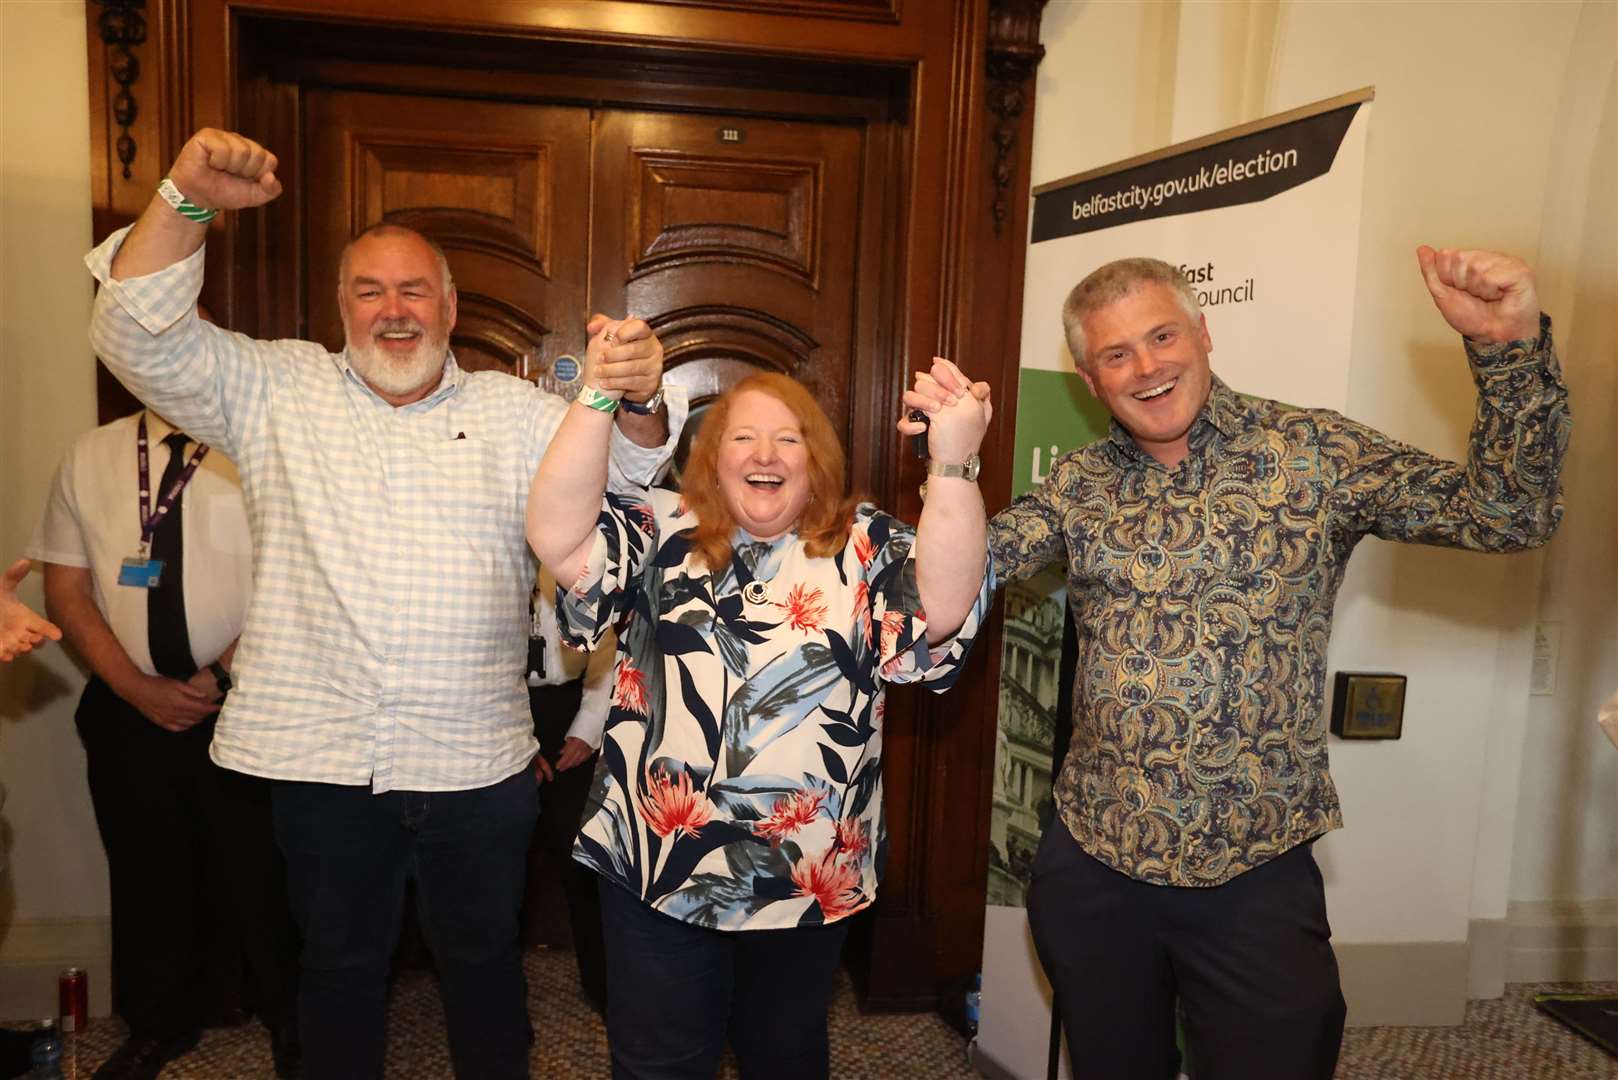 Alliance Party leader Naomi Long (centre) with Eric Hanvey (left) and her husband Michael Long (right) at Belfast City Hall as the results come in for the Northern Ireland local elections (Liam McBurney/PA)